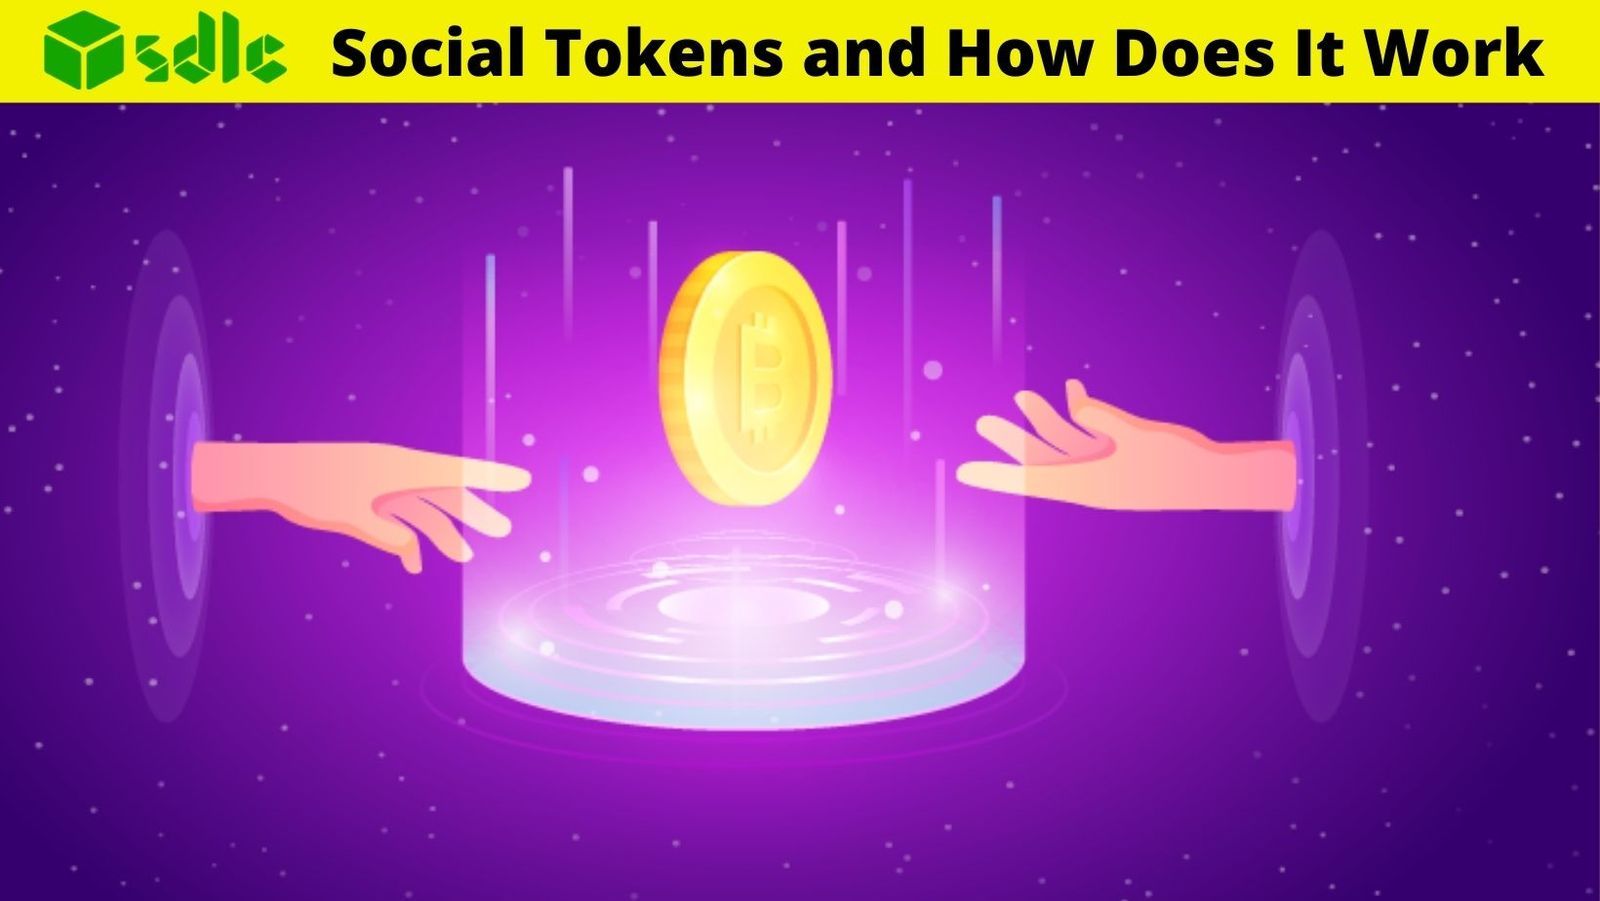 What are Social Tokens and How Does It Work?